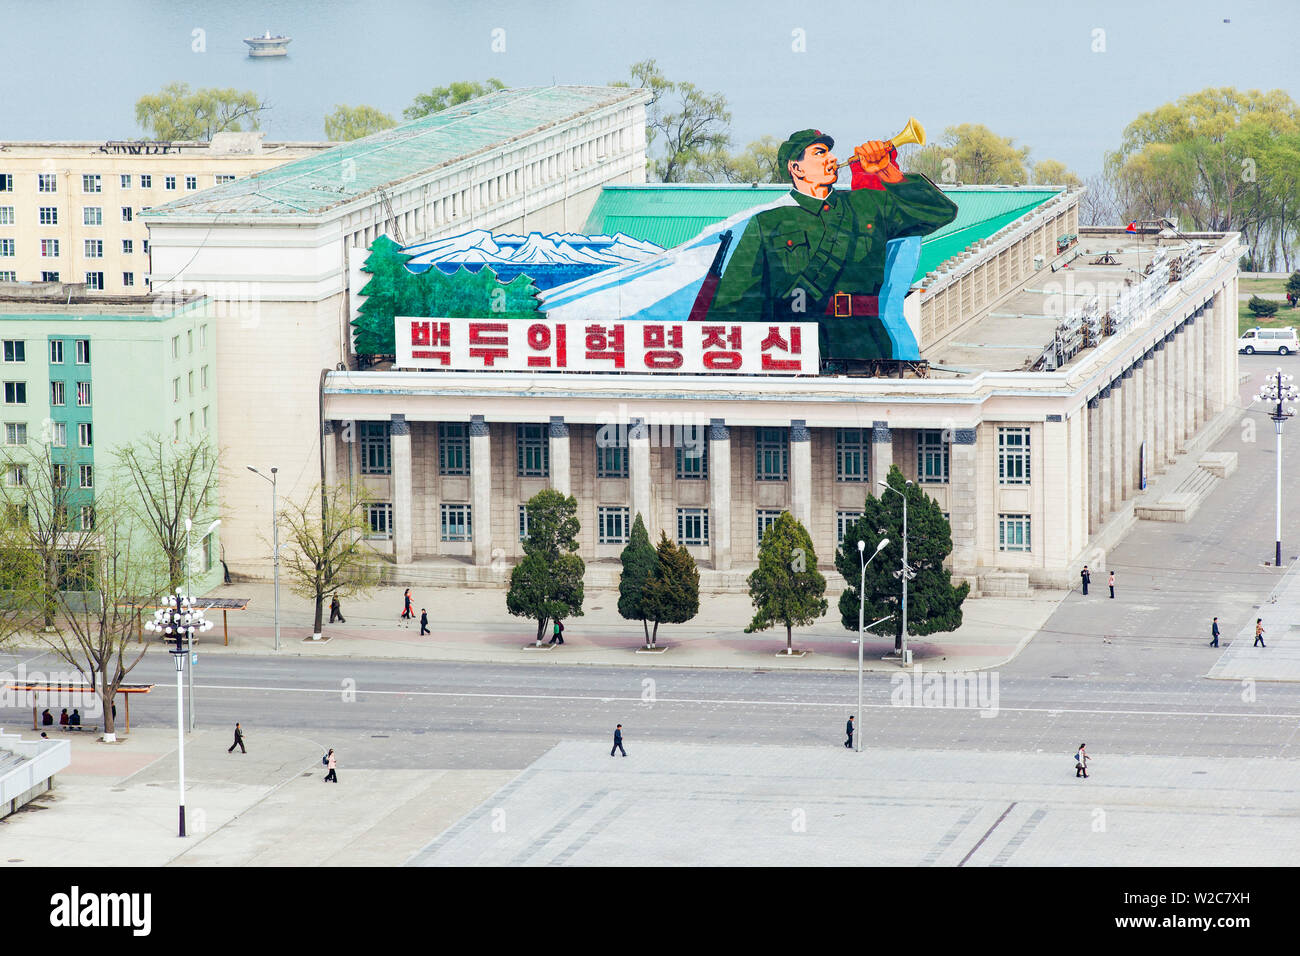 Democratic Peoples's Republic of Korea (DPRK), North Korea, Pyongyang, elevated view over Kim Il Sung Square Stock Photo